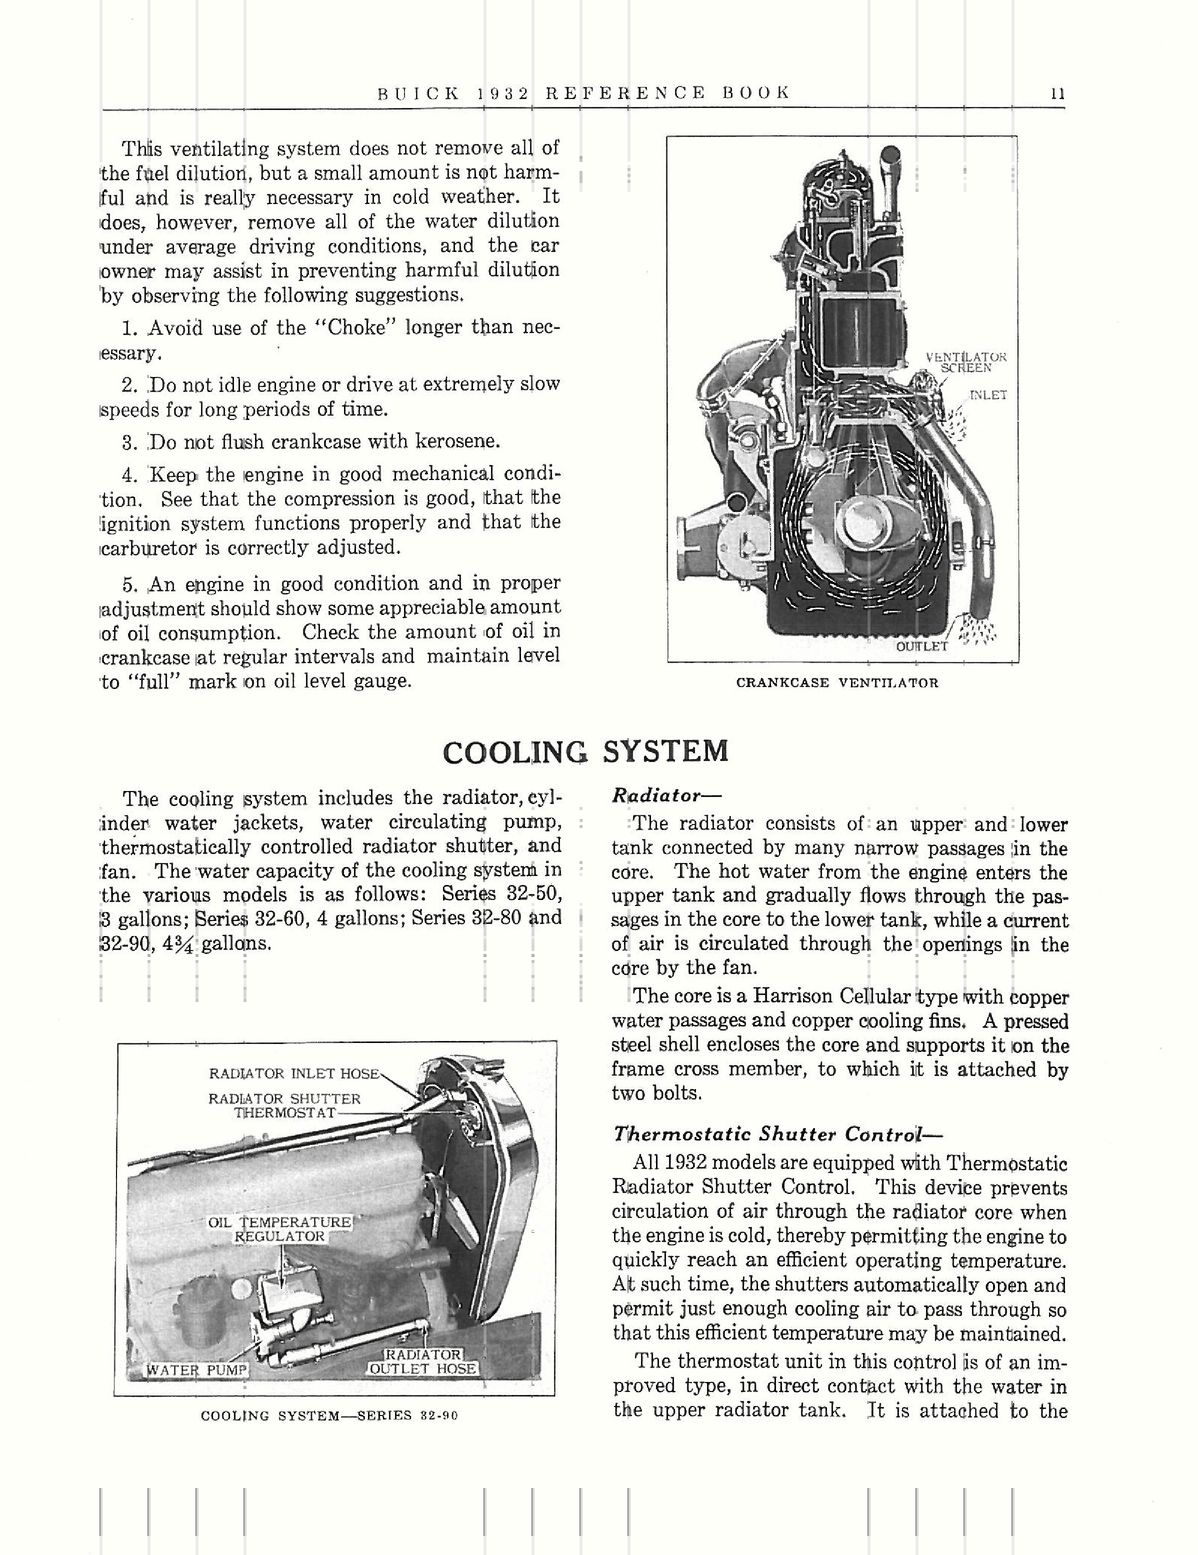 n_1932 Buick Reference Book-11.jpg